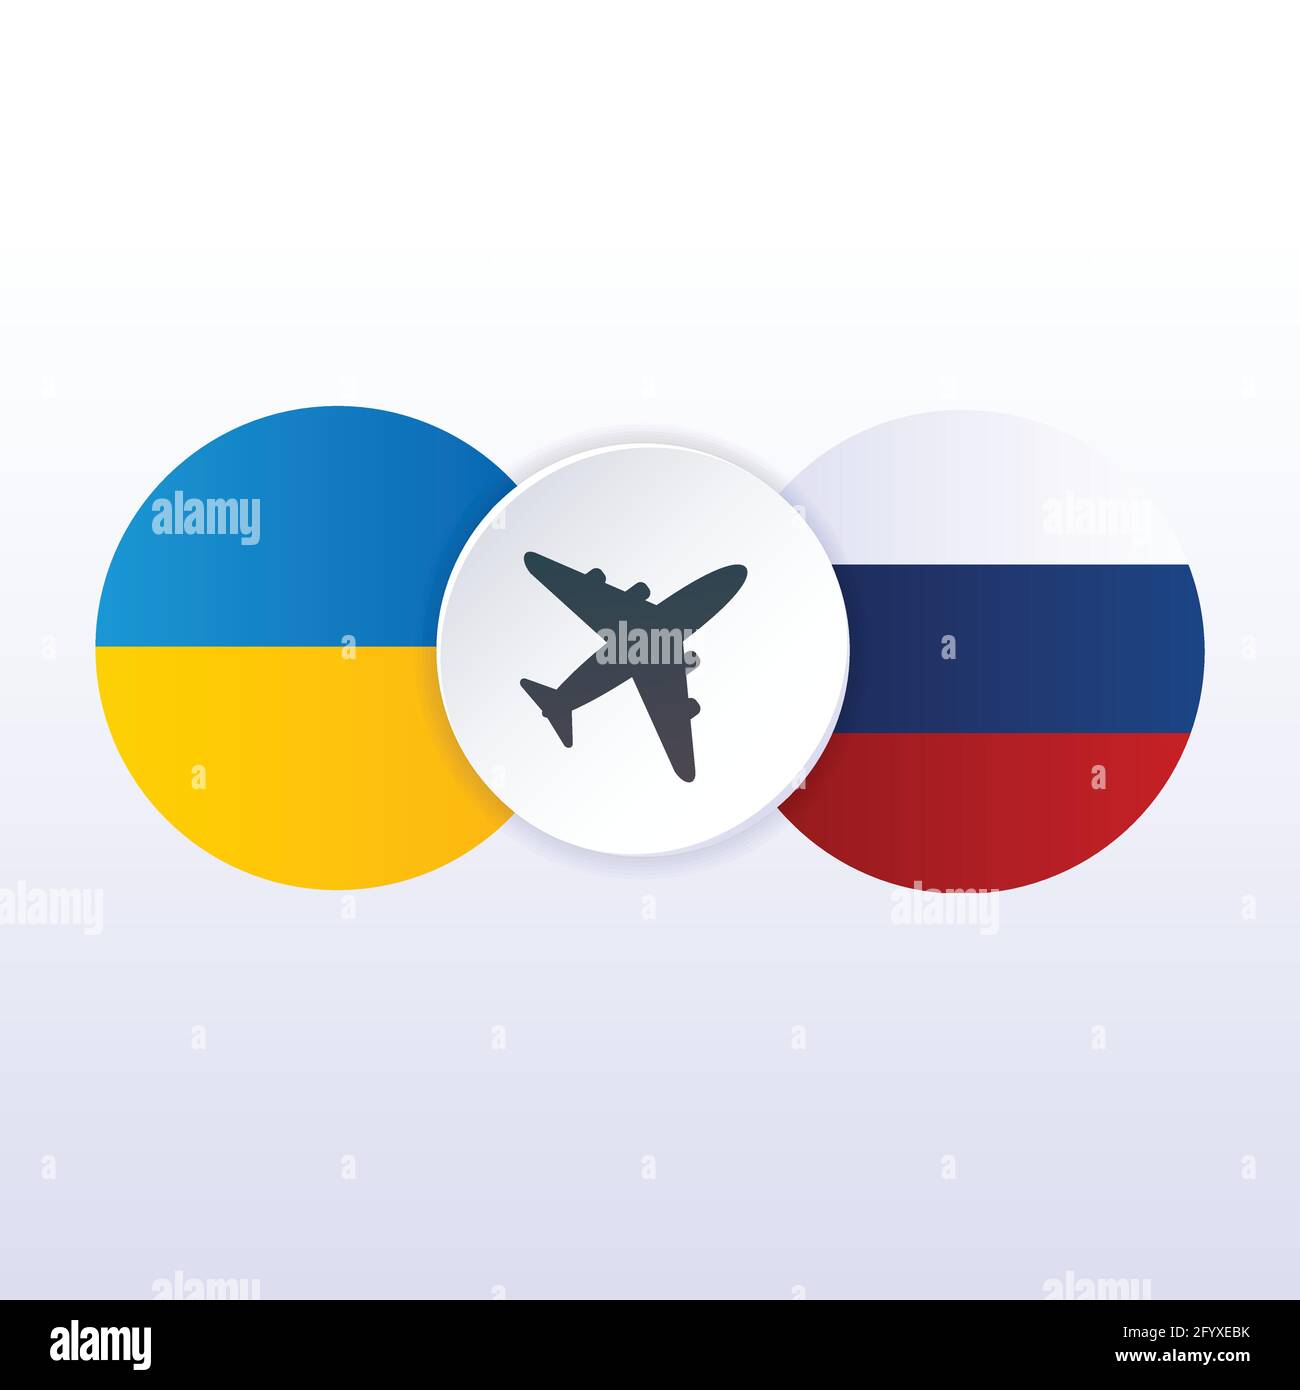 Closure airspace of Russia and Ukraine vector illustration. Tariff trade war crisis, relations, cooperation strategy. Concept for web page, banner, pr Stock Vector